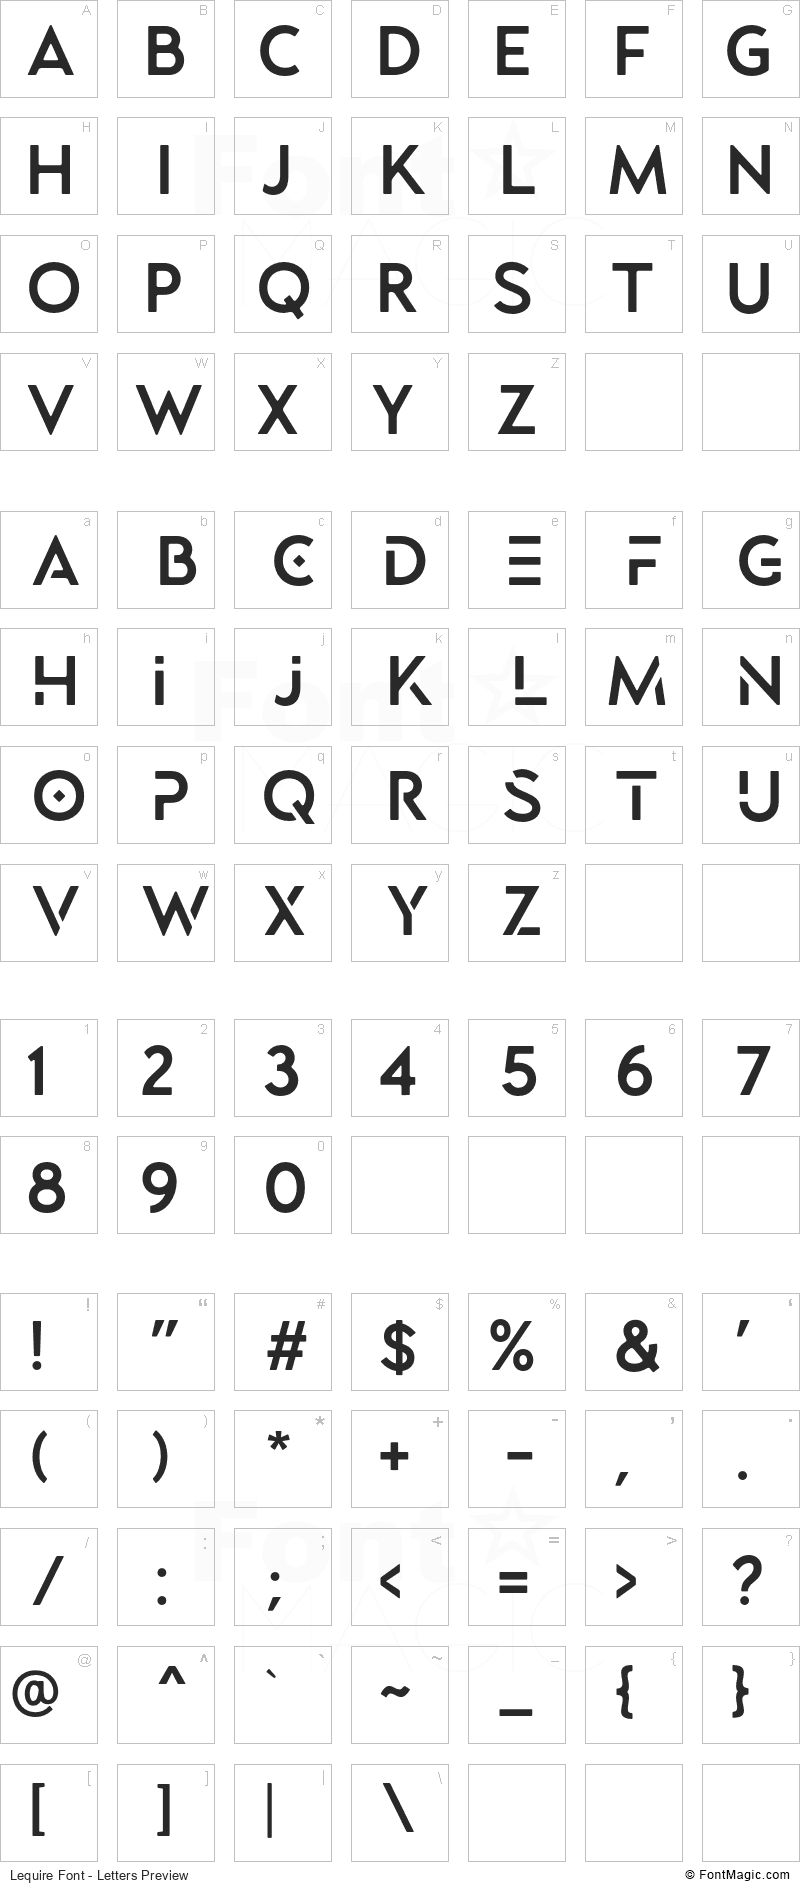 Lequire Font - All Latters Preview Chart